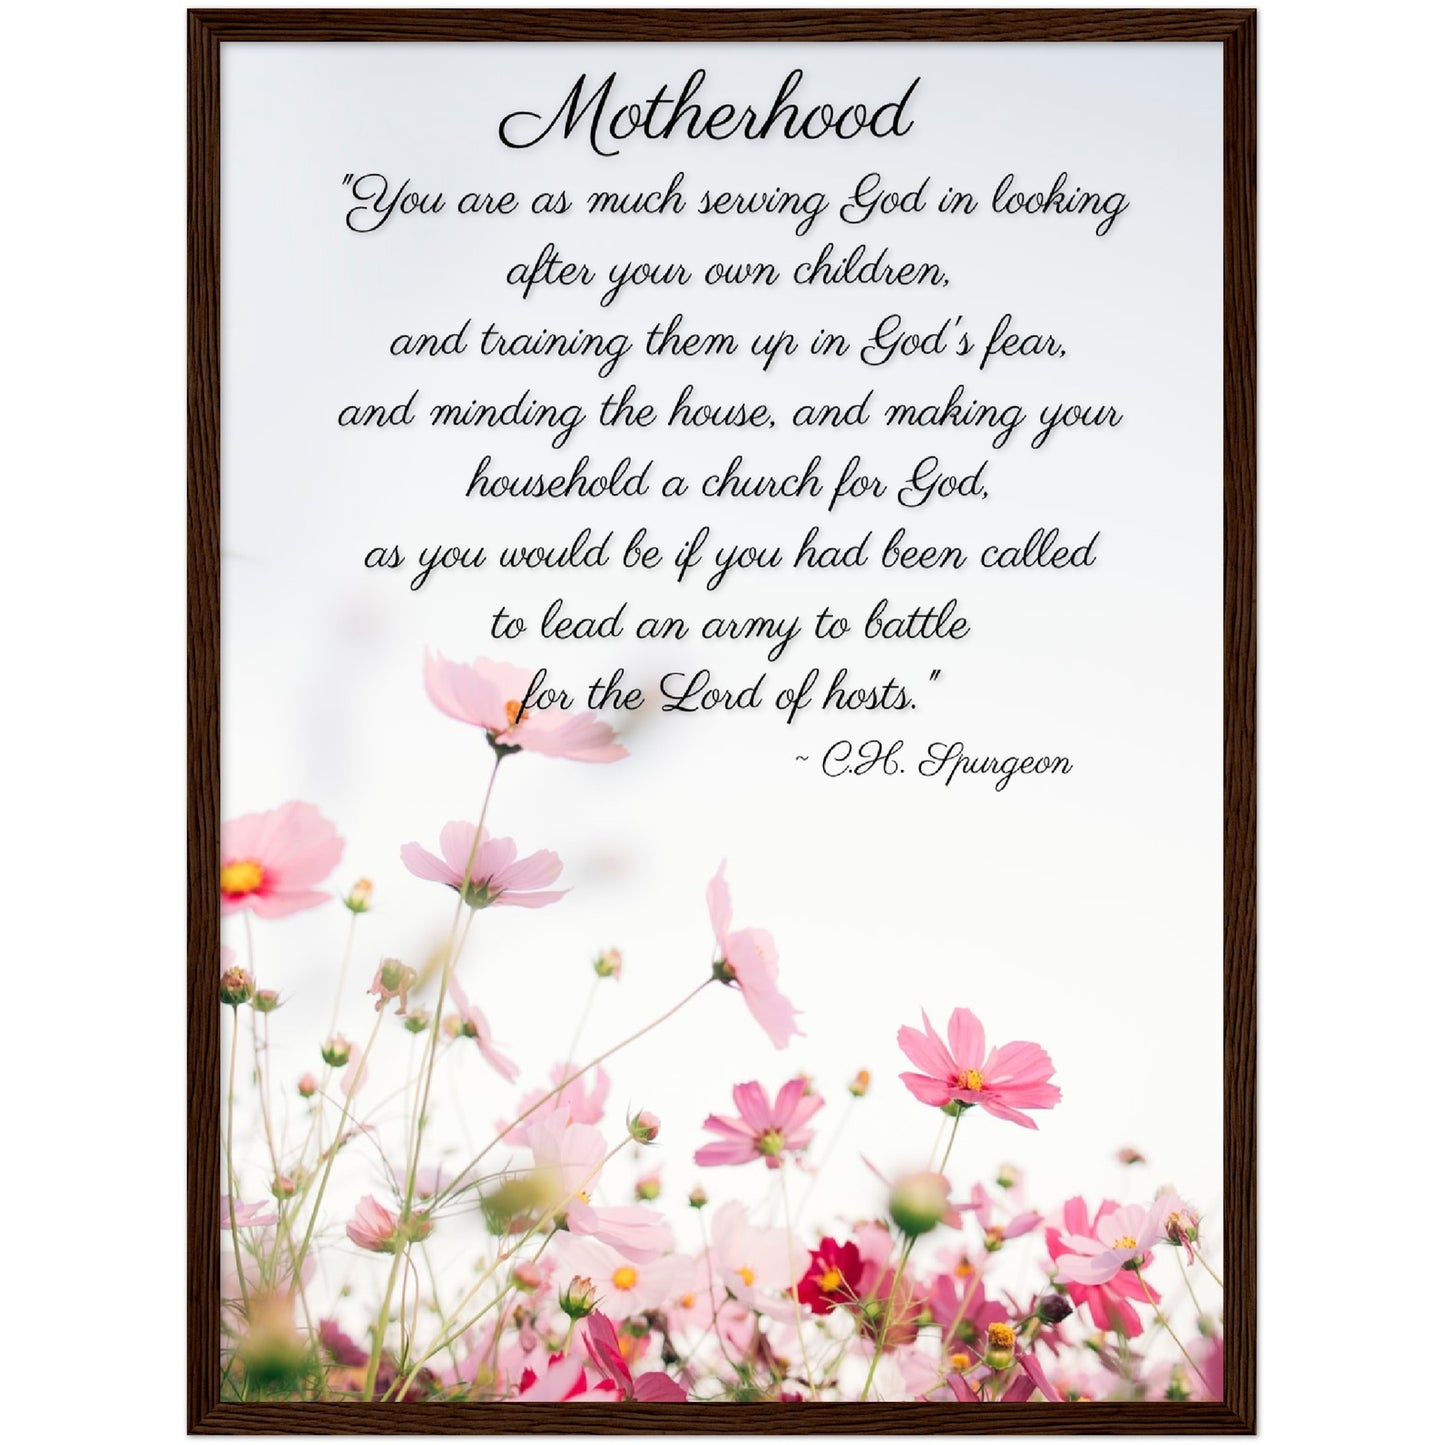 Framed Motherhood Quote Floral | Quote by C.H. Spurgeon Poster | Christian Wall Art for Mom